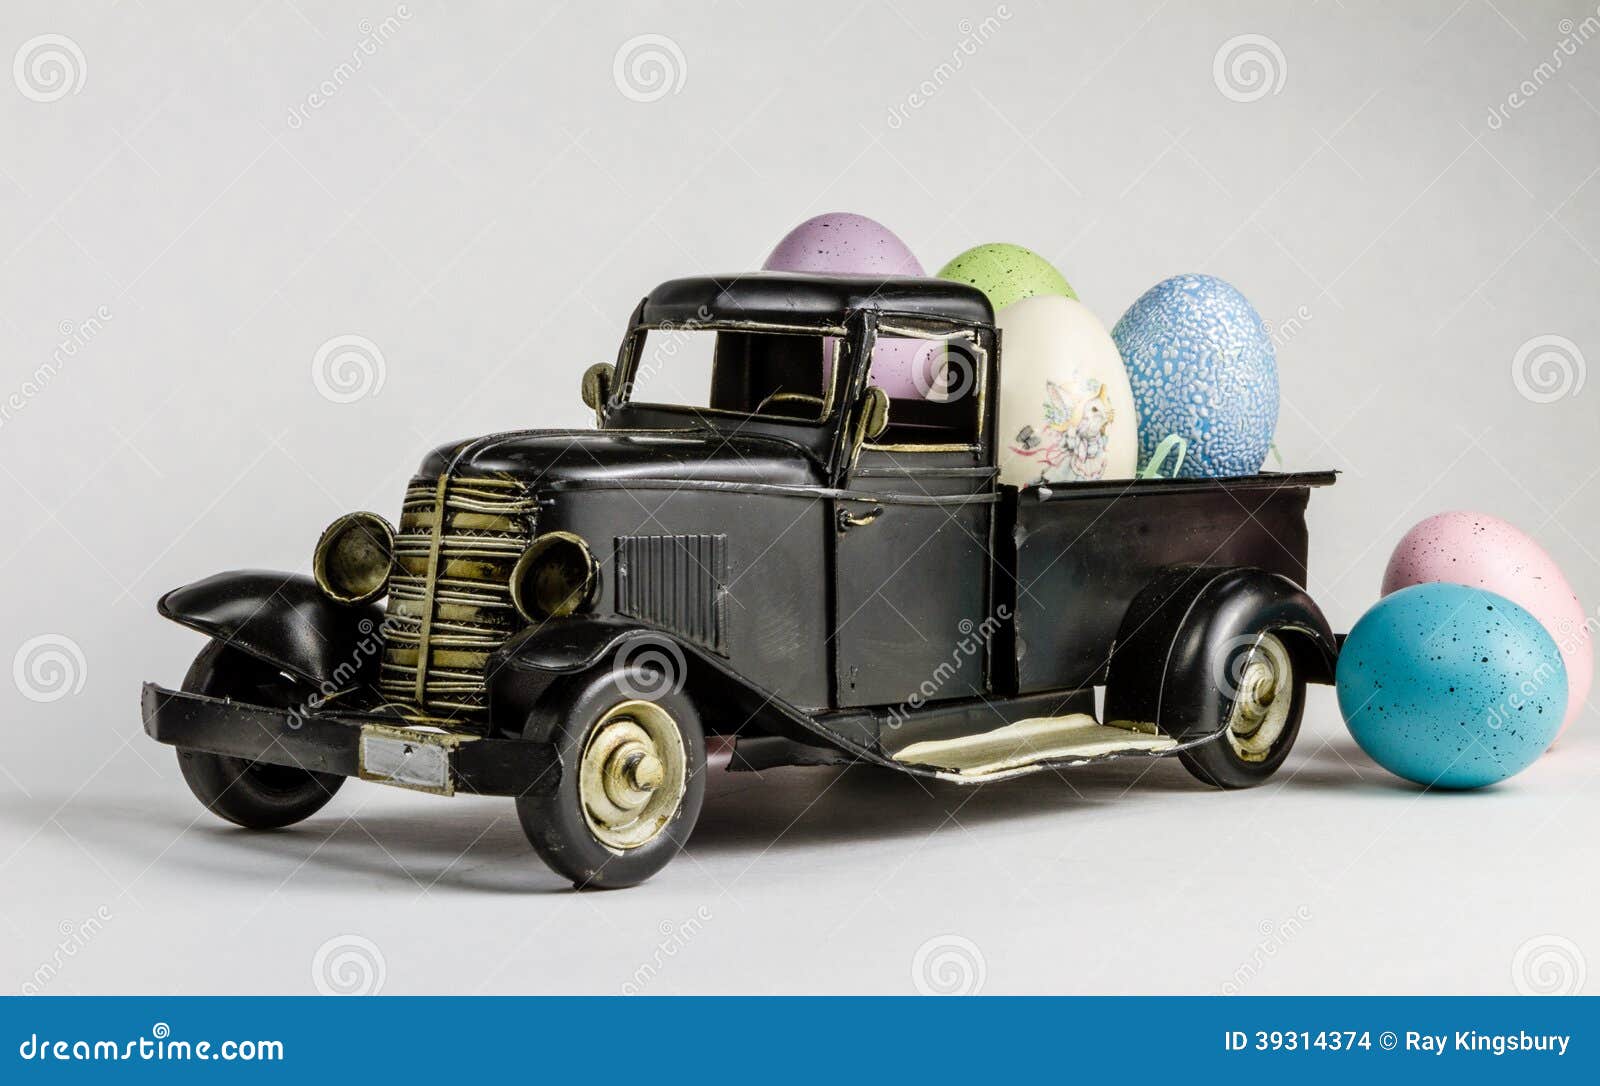 20,20 Delivery Easter Photos   Free & Royalty Free Stock Photos ...